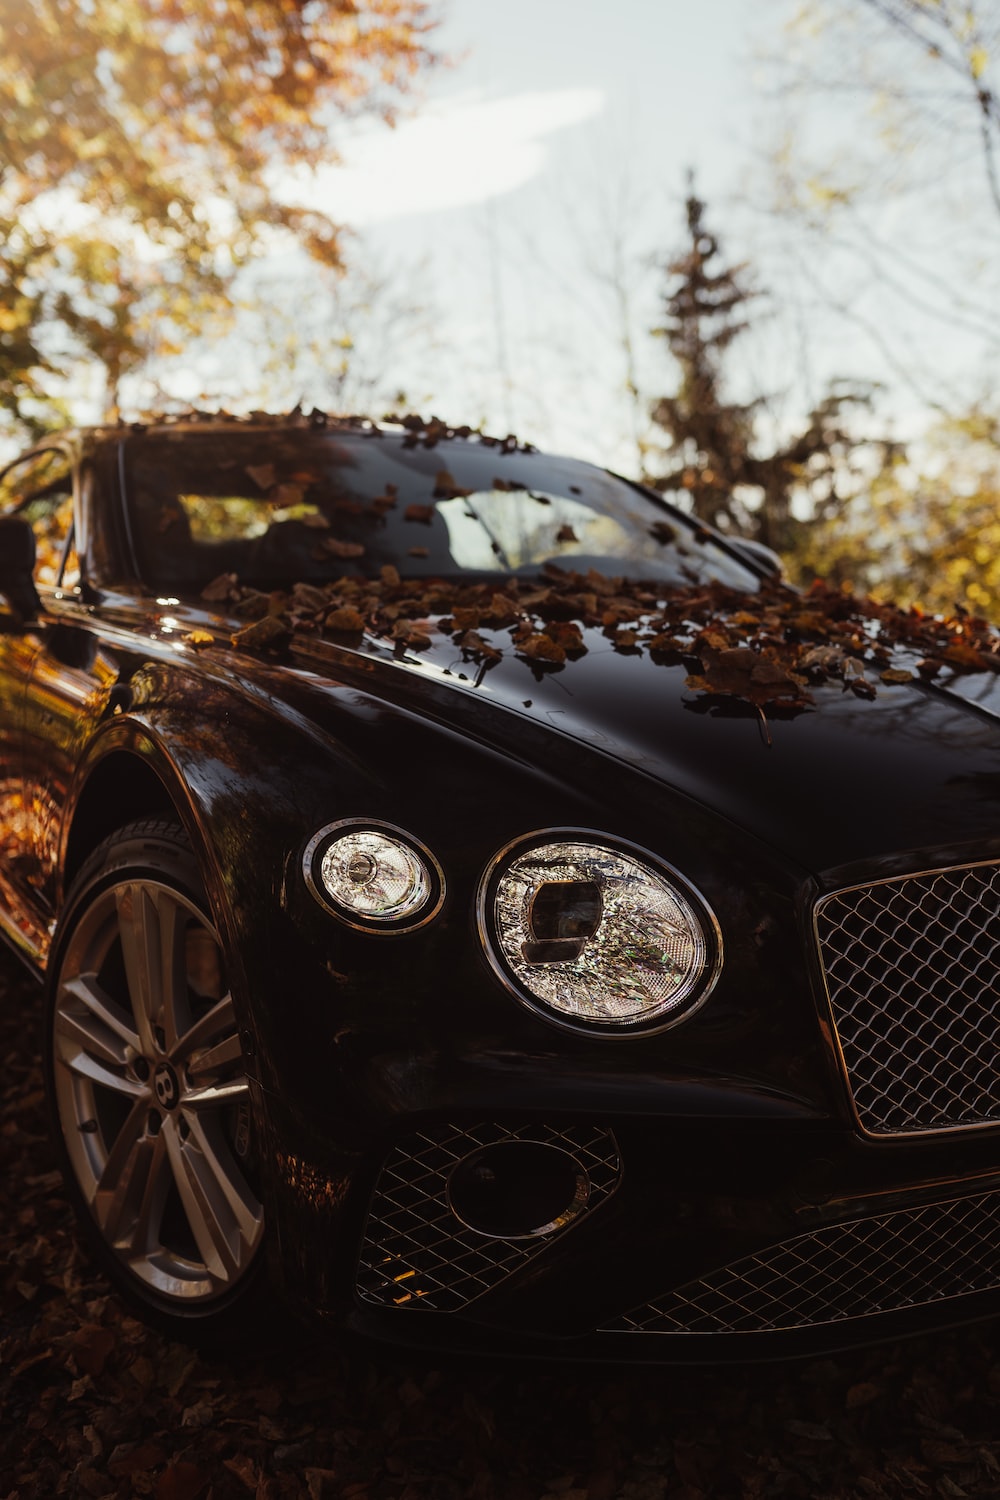 Bentley Continental Gt Picture. Download Free Image